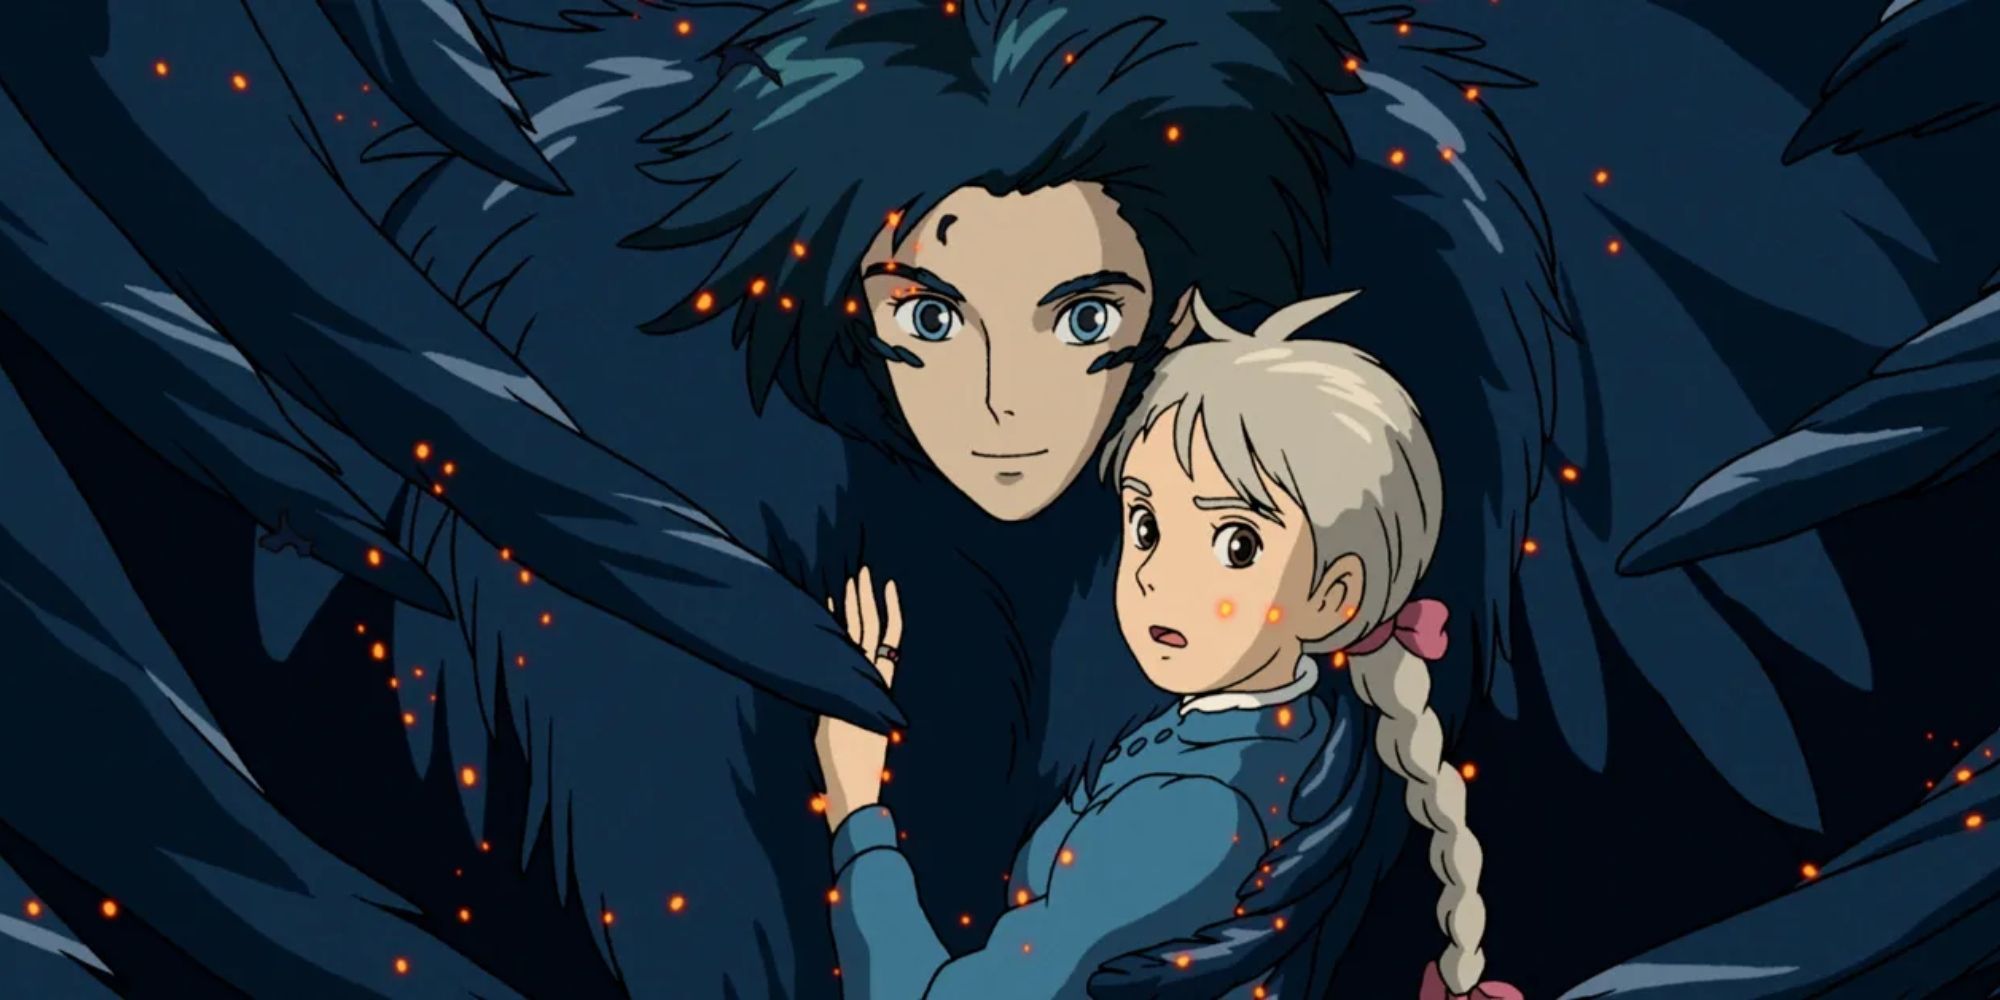 Howl protects Sophie in his bird form in Howl's Moving Castle